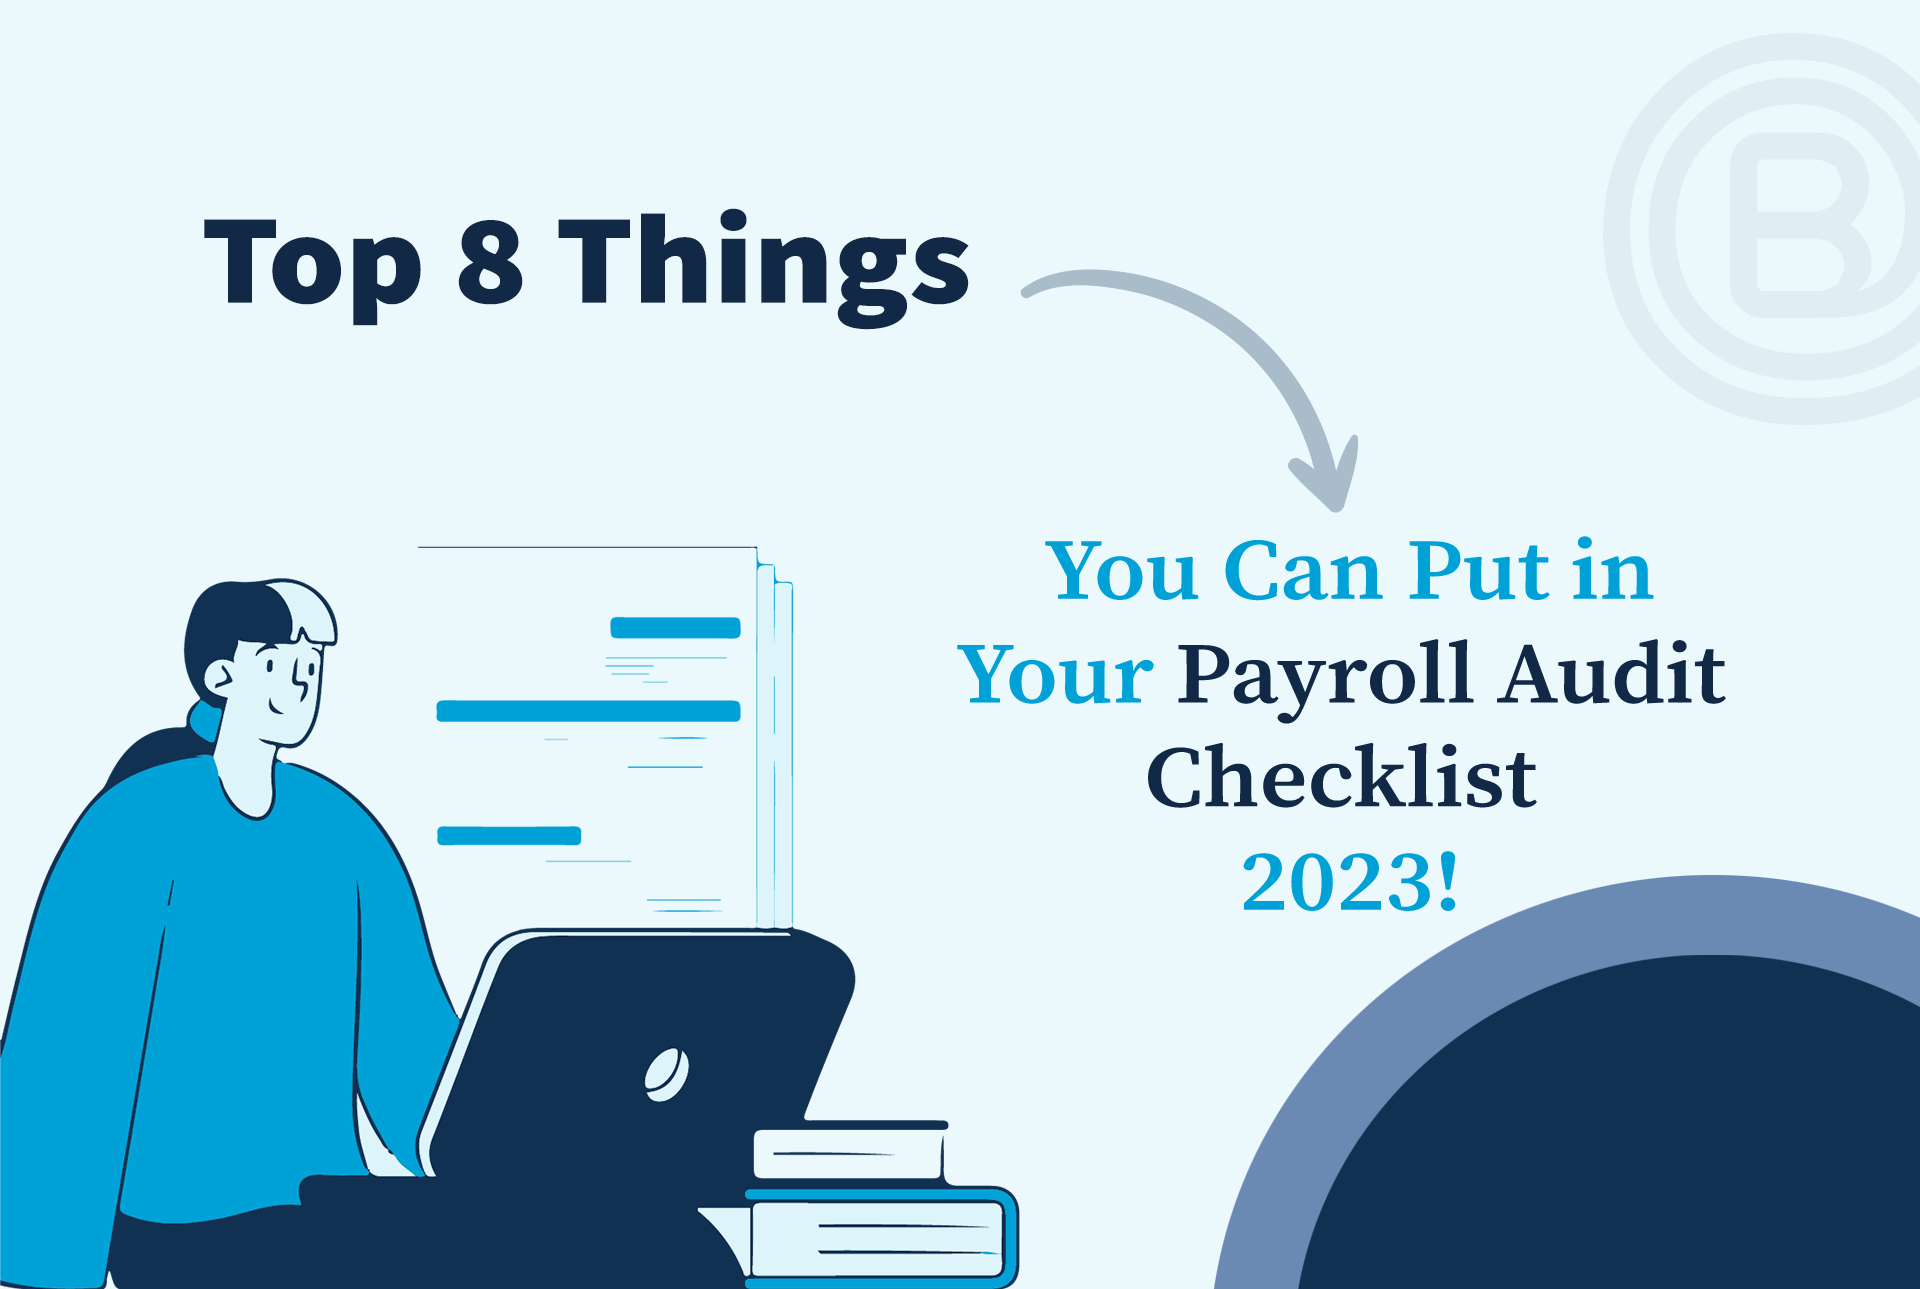 Top 8 Things You Can Put in Your Payroll Audit Checklist 2023!